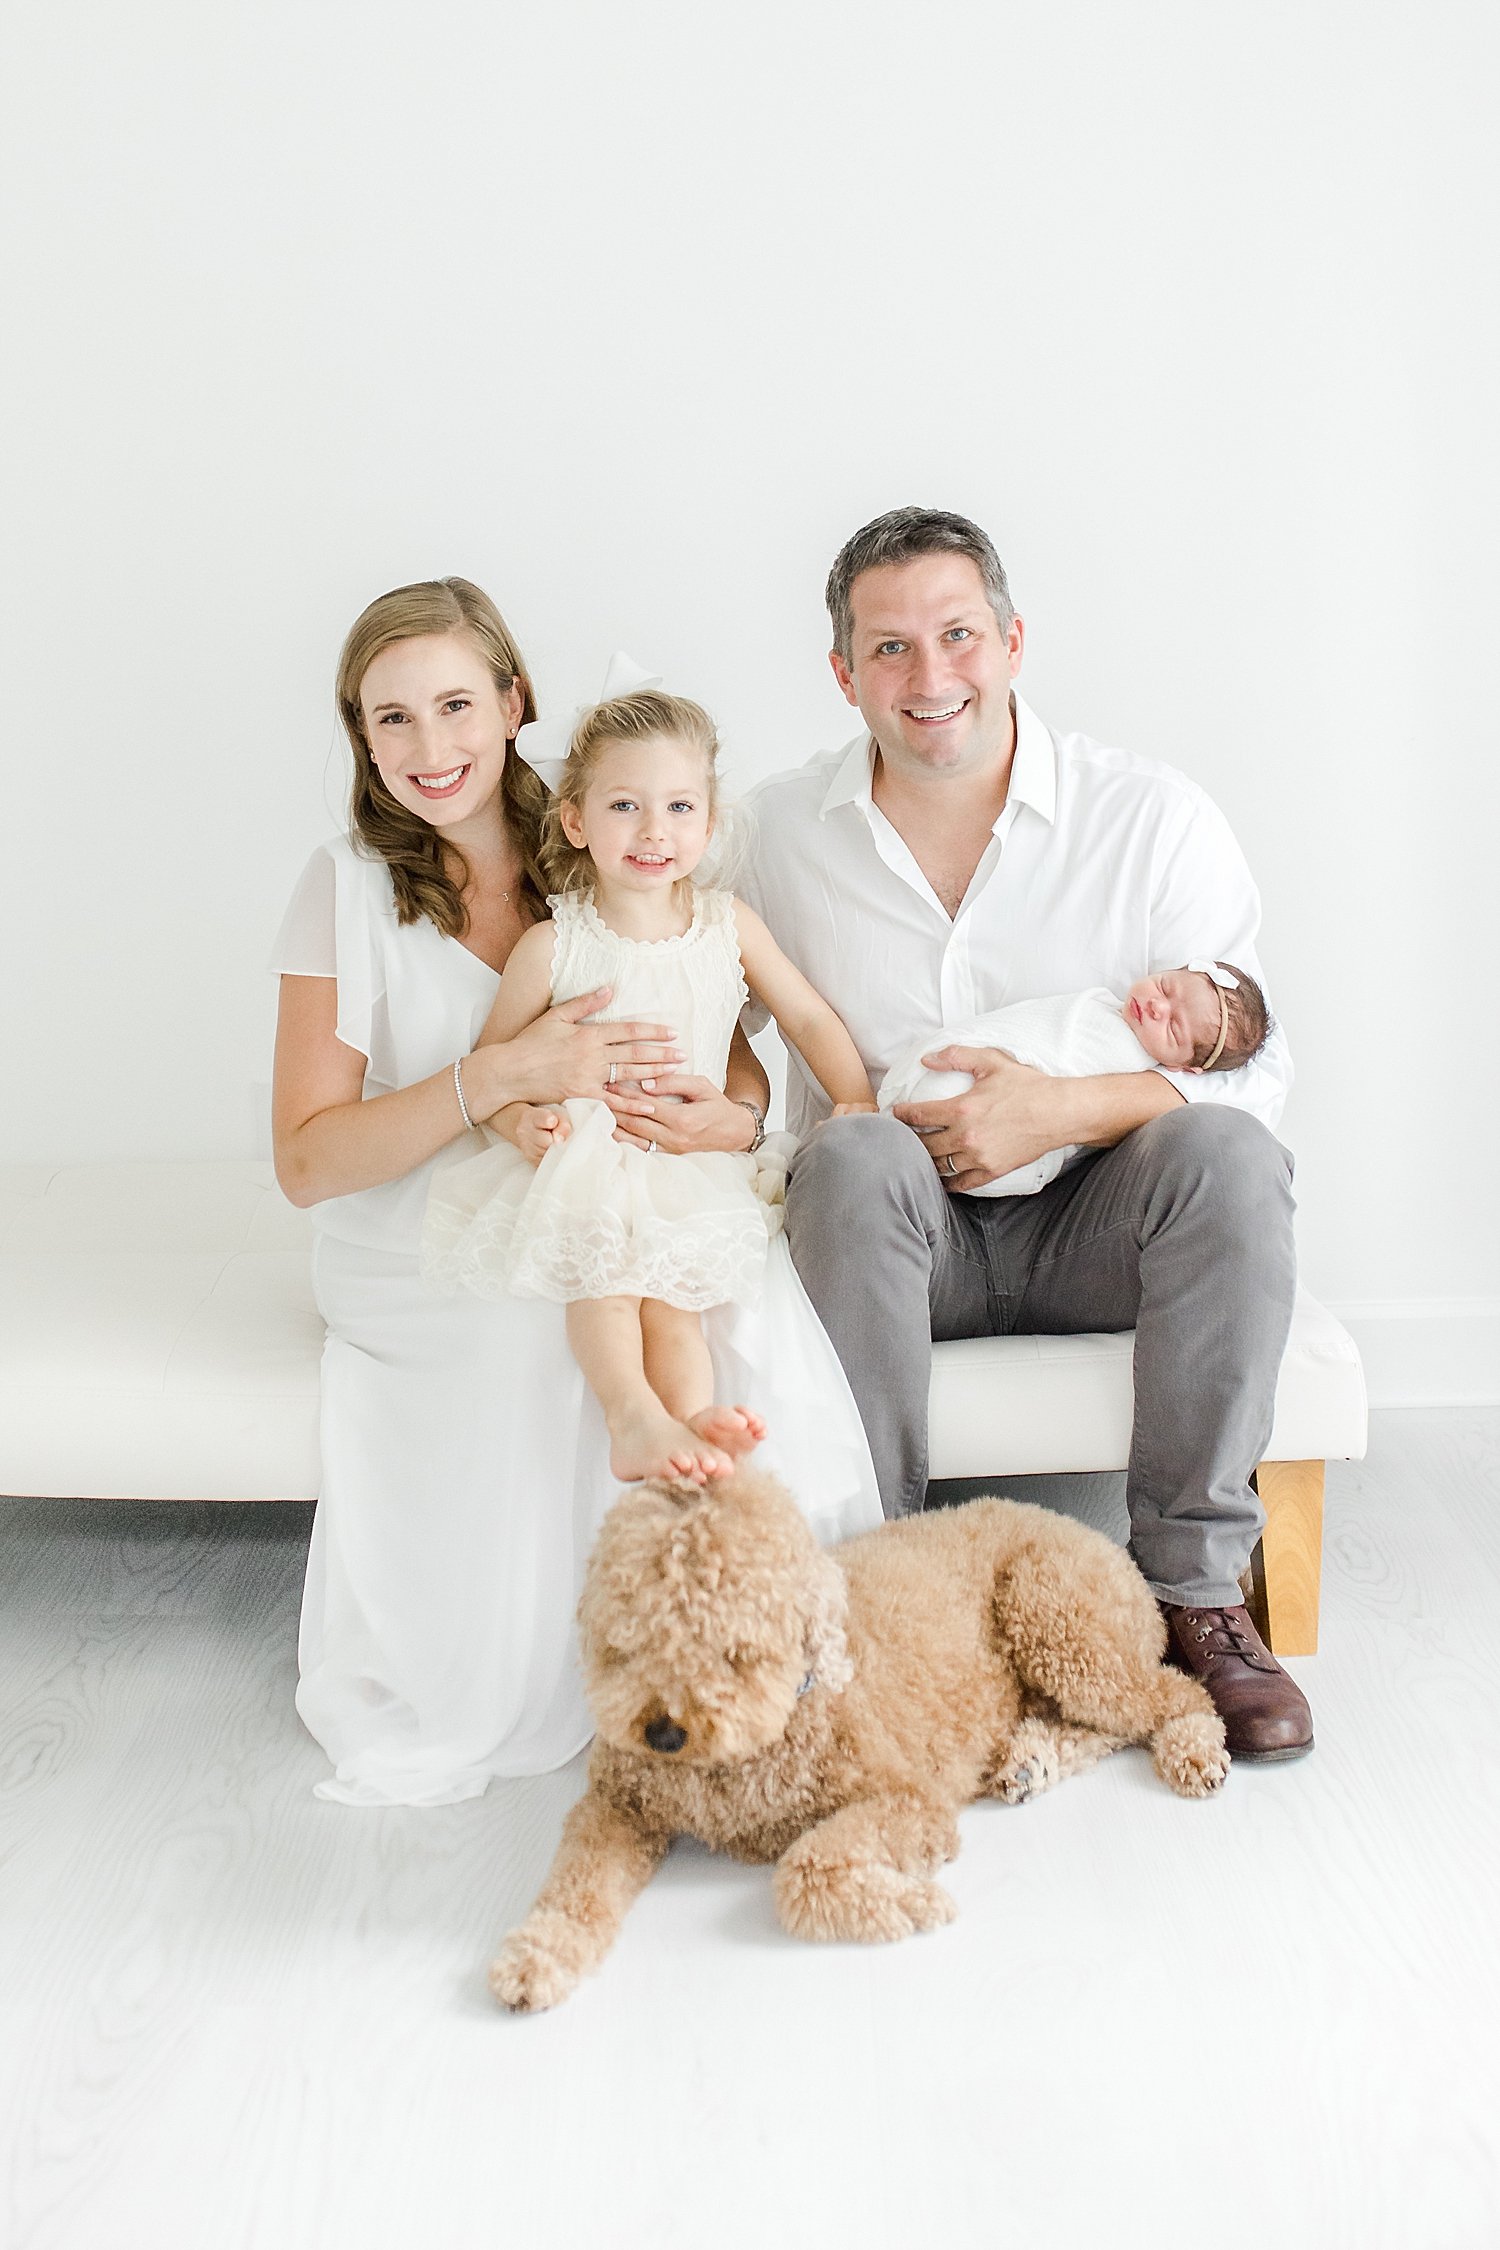 Family newborn session, including family dog, in studio in Westport | Kristin Wood Photography